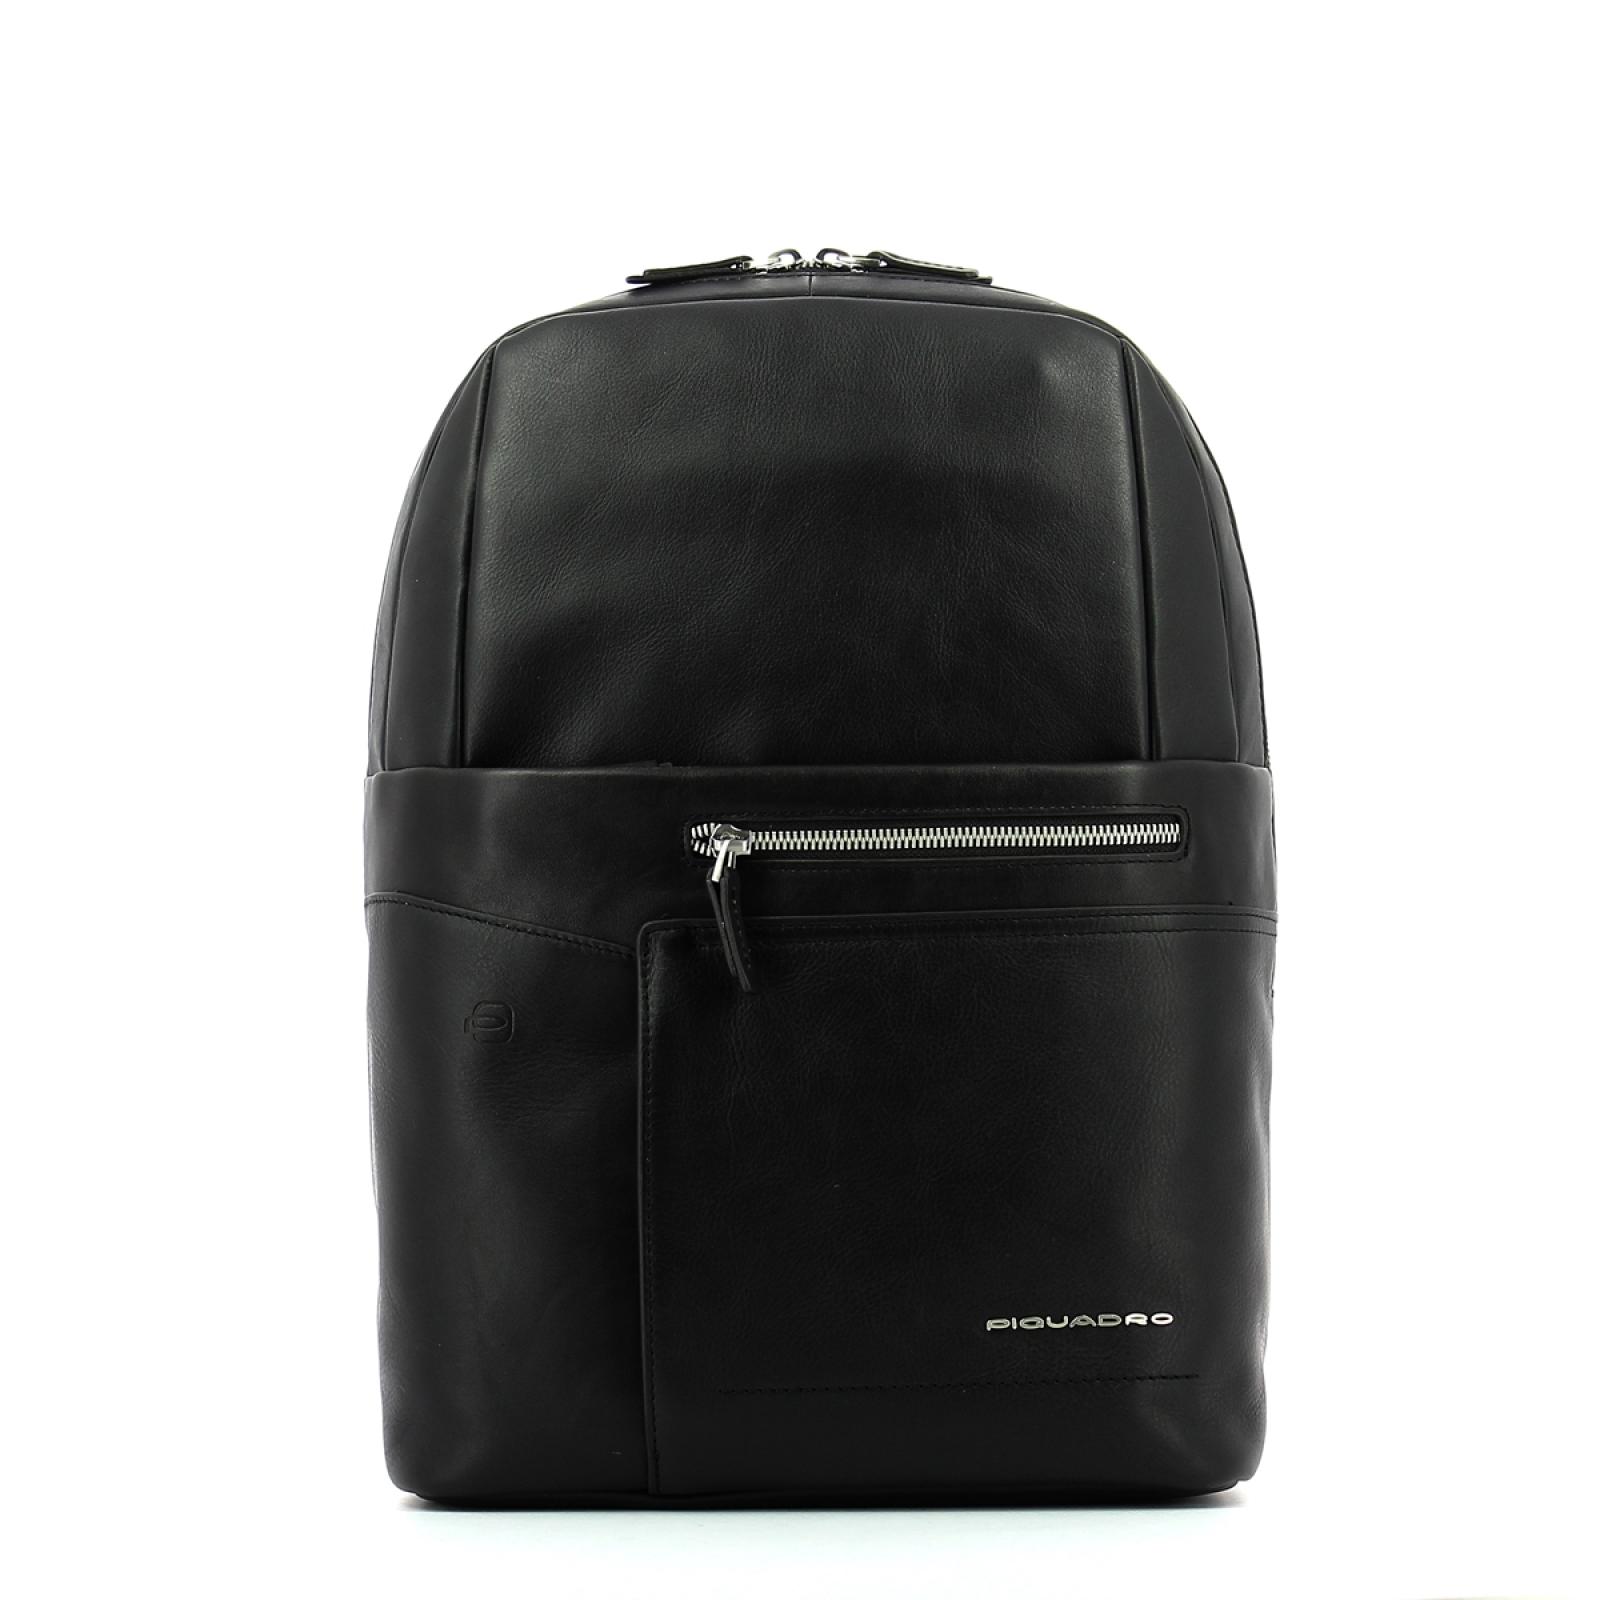 Laptop Backpack 13.3 Cary-NERO-UN